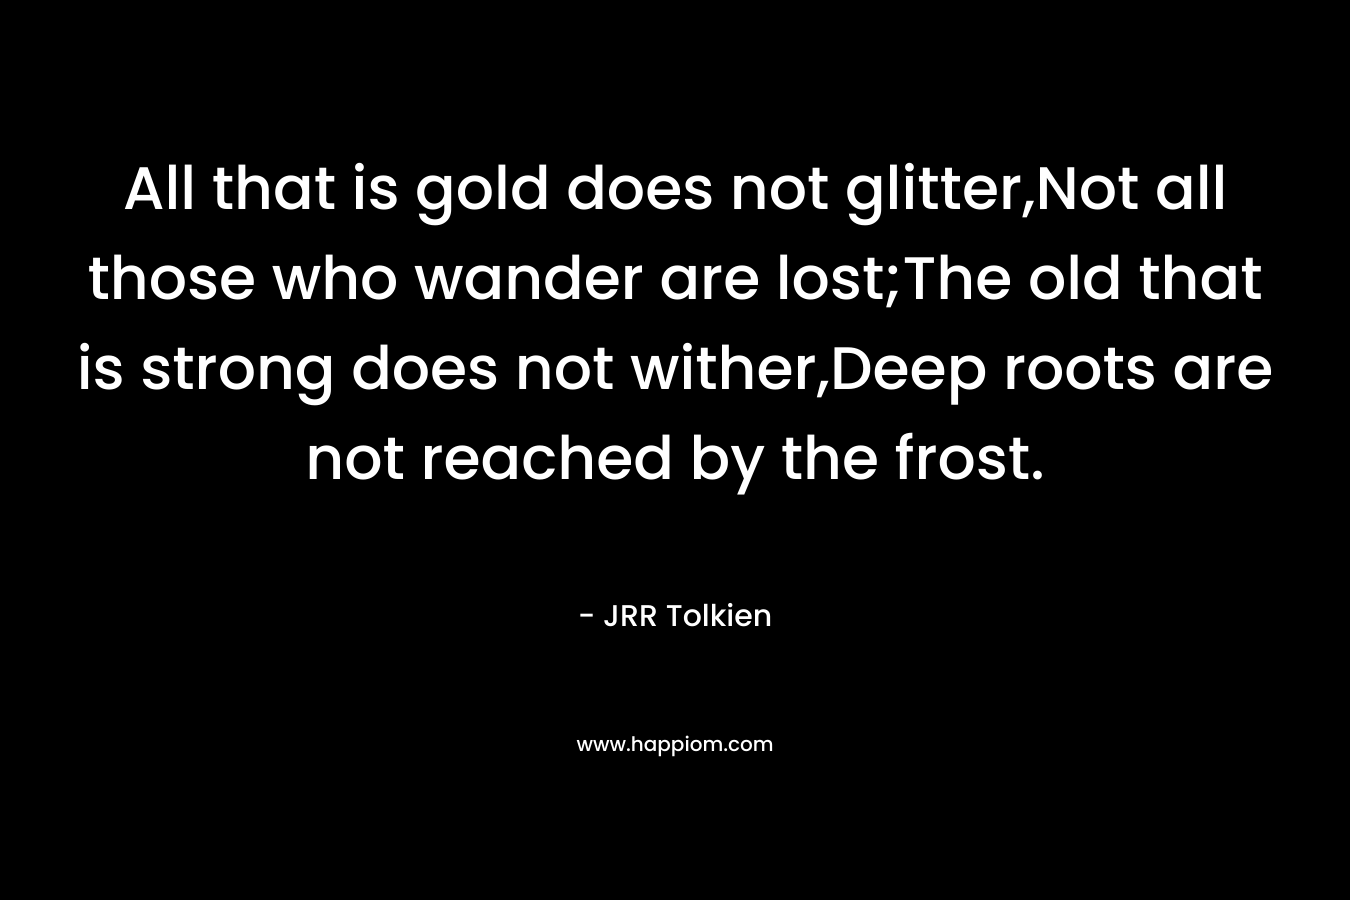 All that is gold does not glitter,Not all those who wander are lost;The old that is strong does not wither,Deep roots are not reached by the frost. – JRR Tolkien